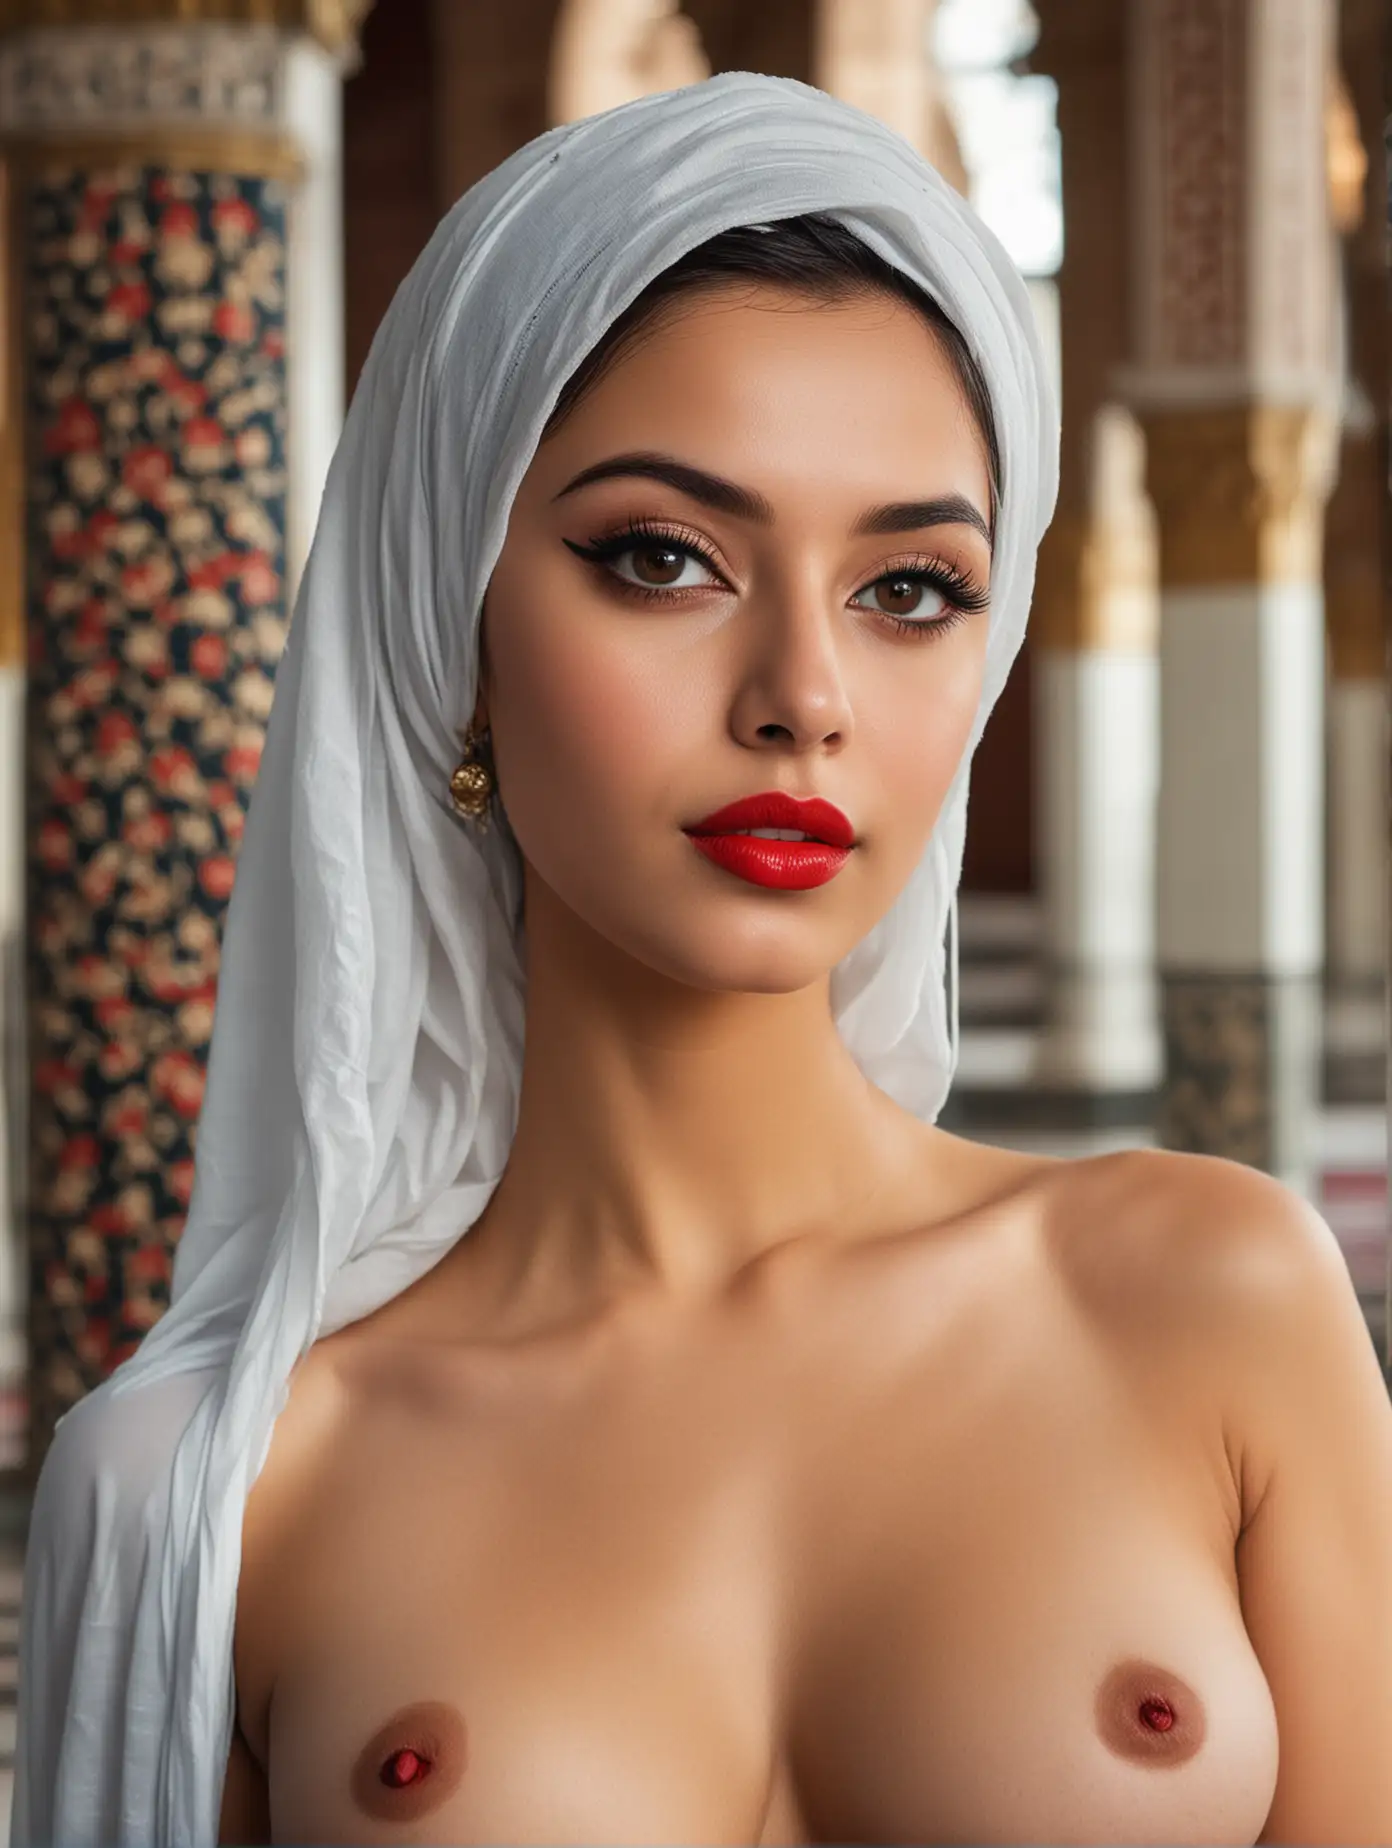 Beautiful Muslim girl, topless, with red lipstick, eyeliner standing topless in mosque.